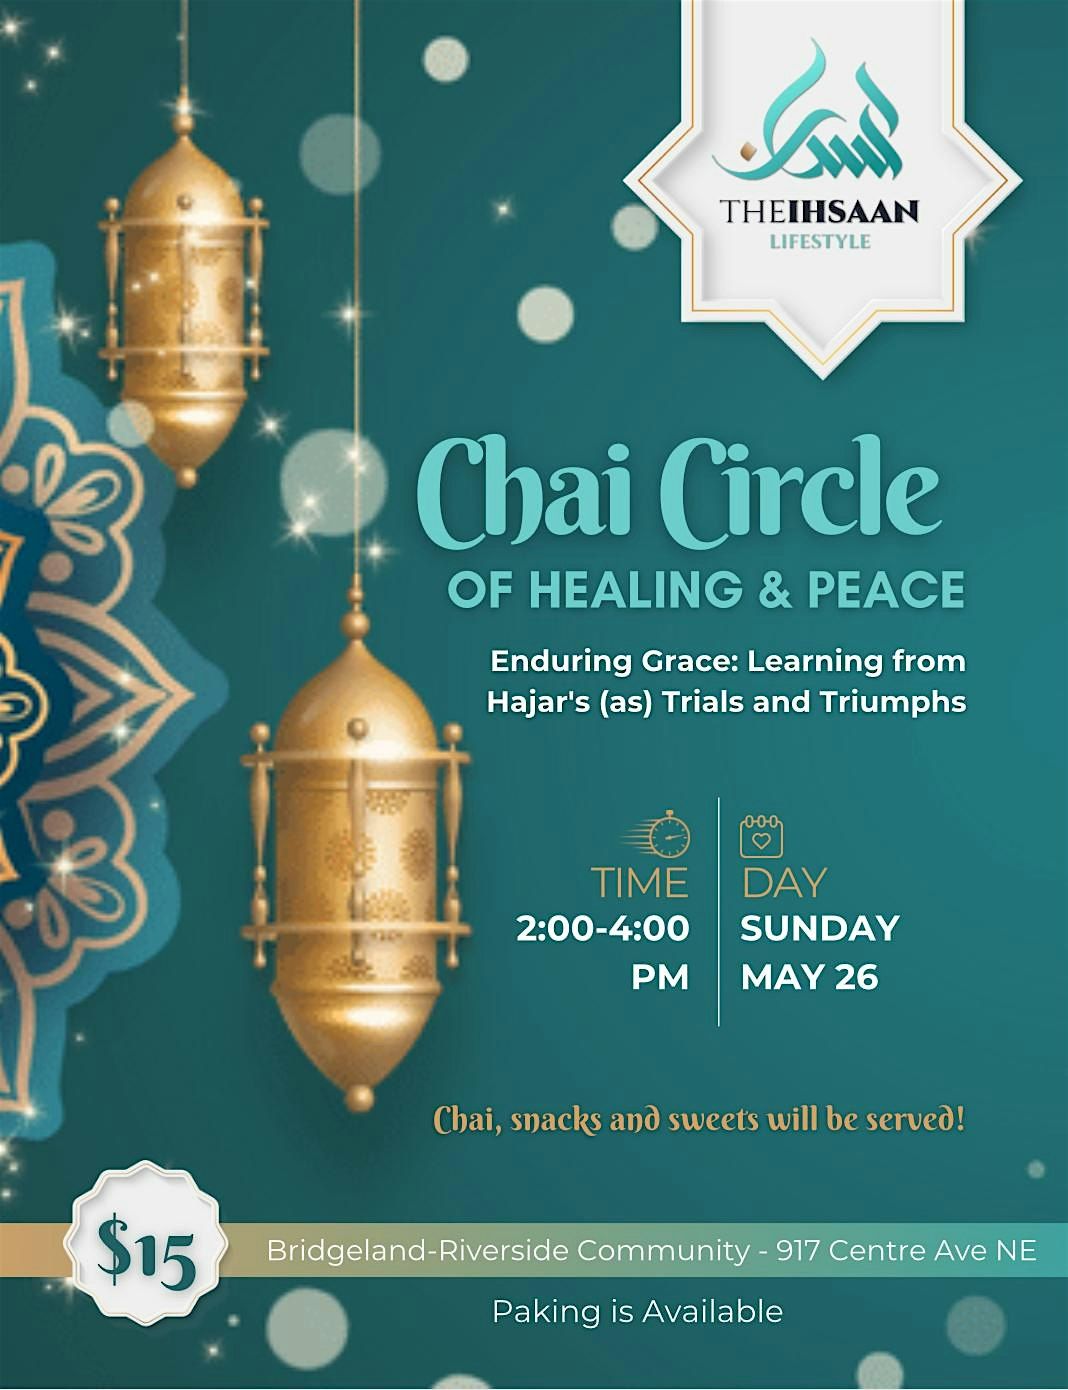 Enduring Grace: Learning from Hajar's Trials and Triumphs